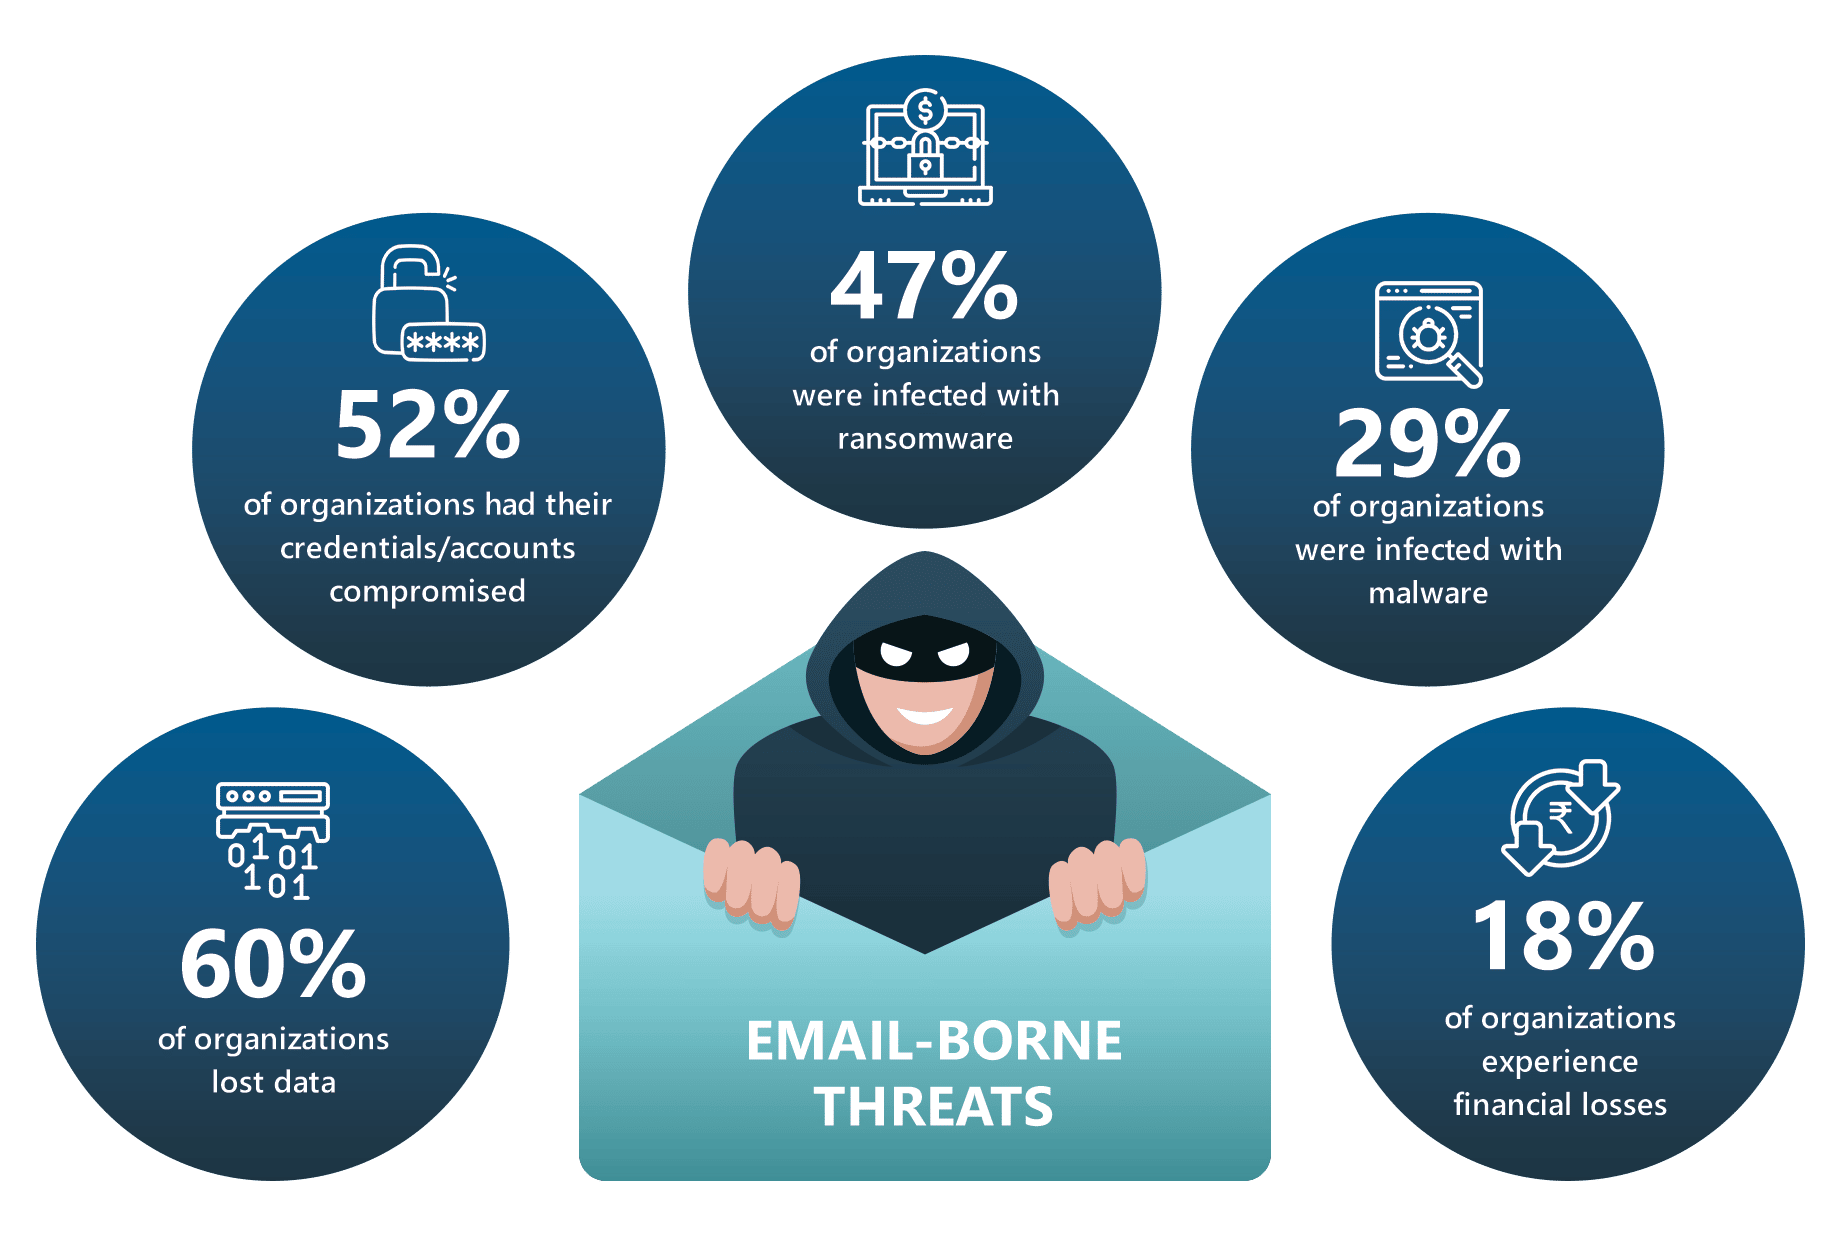 Security Awareness Training and Simulated Phishing Effective in Reducing Cybersecurity Risk